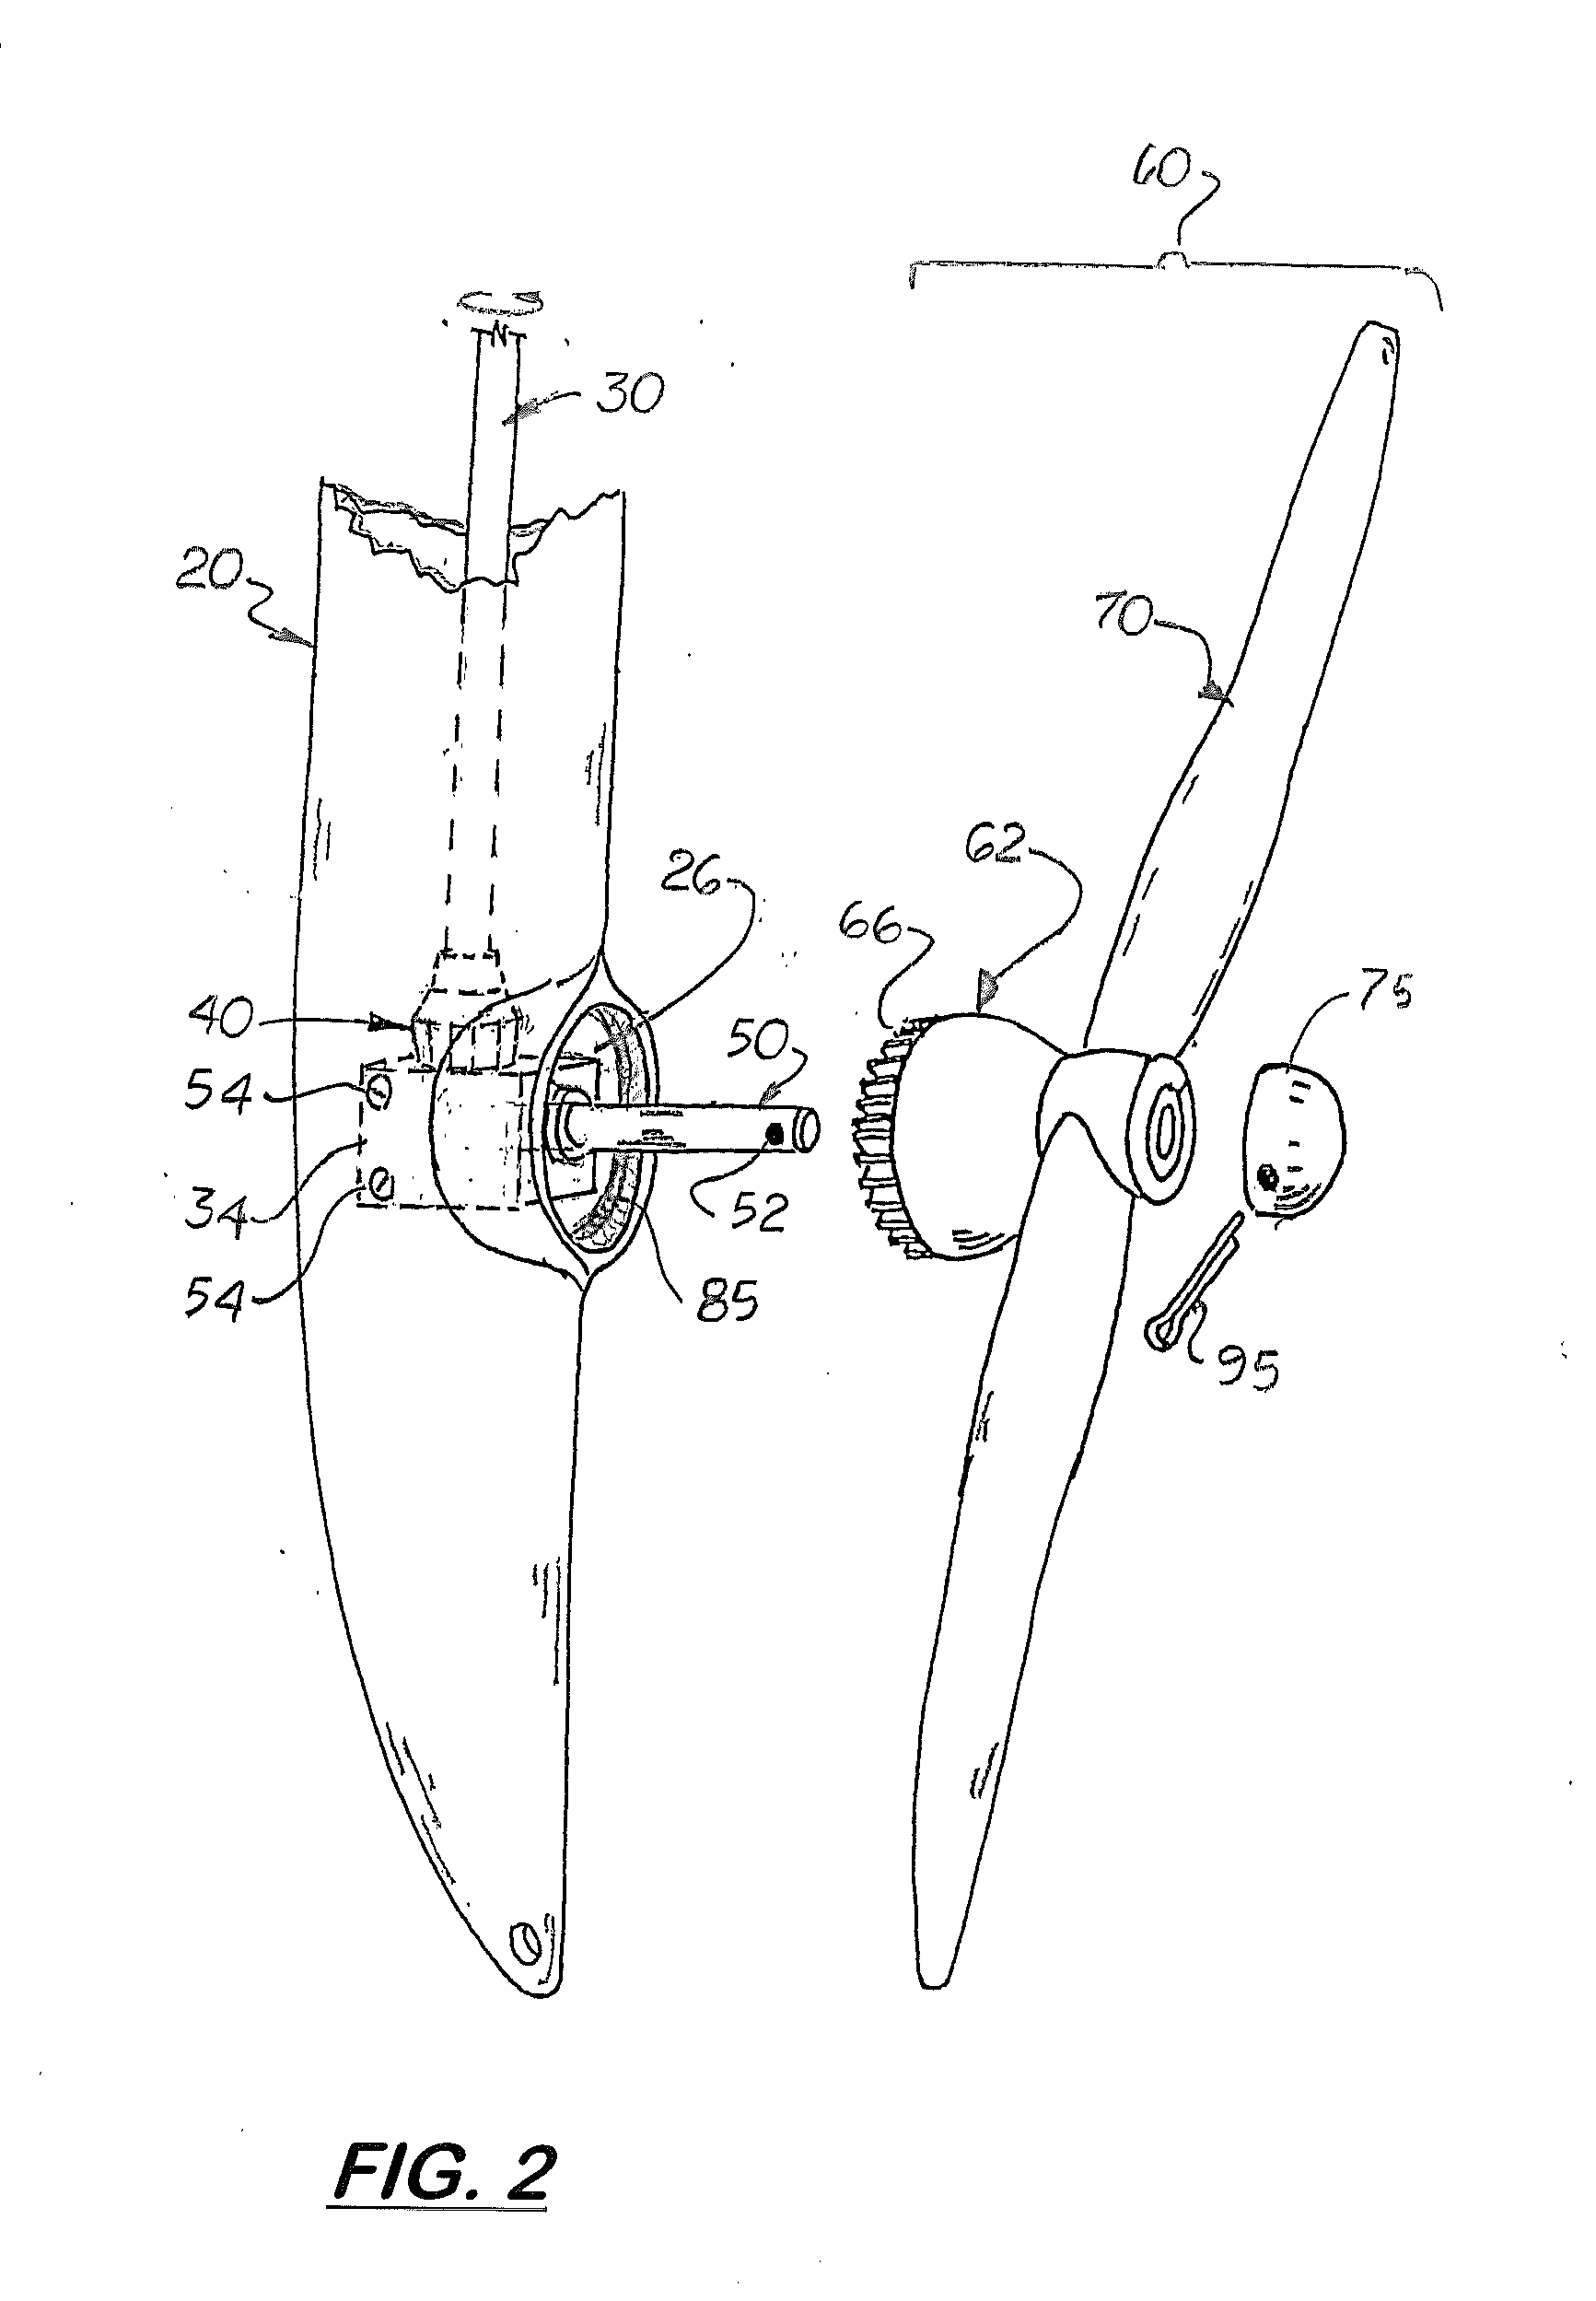 Activation and Deactivation Assembly for an Electric Outboard Motor